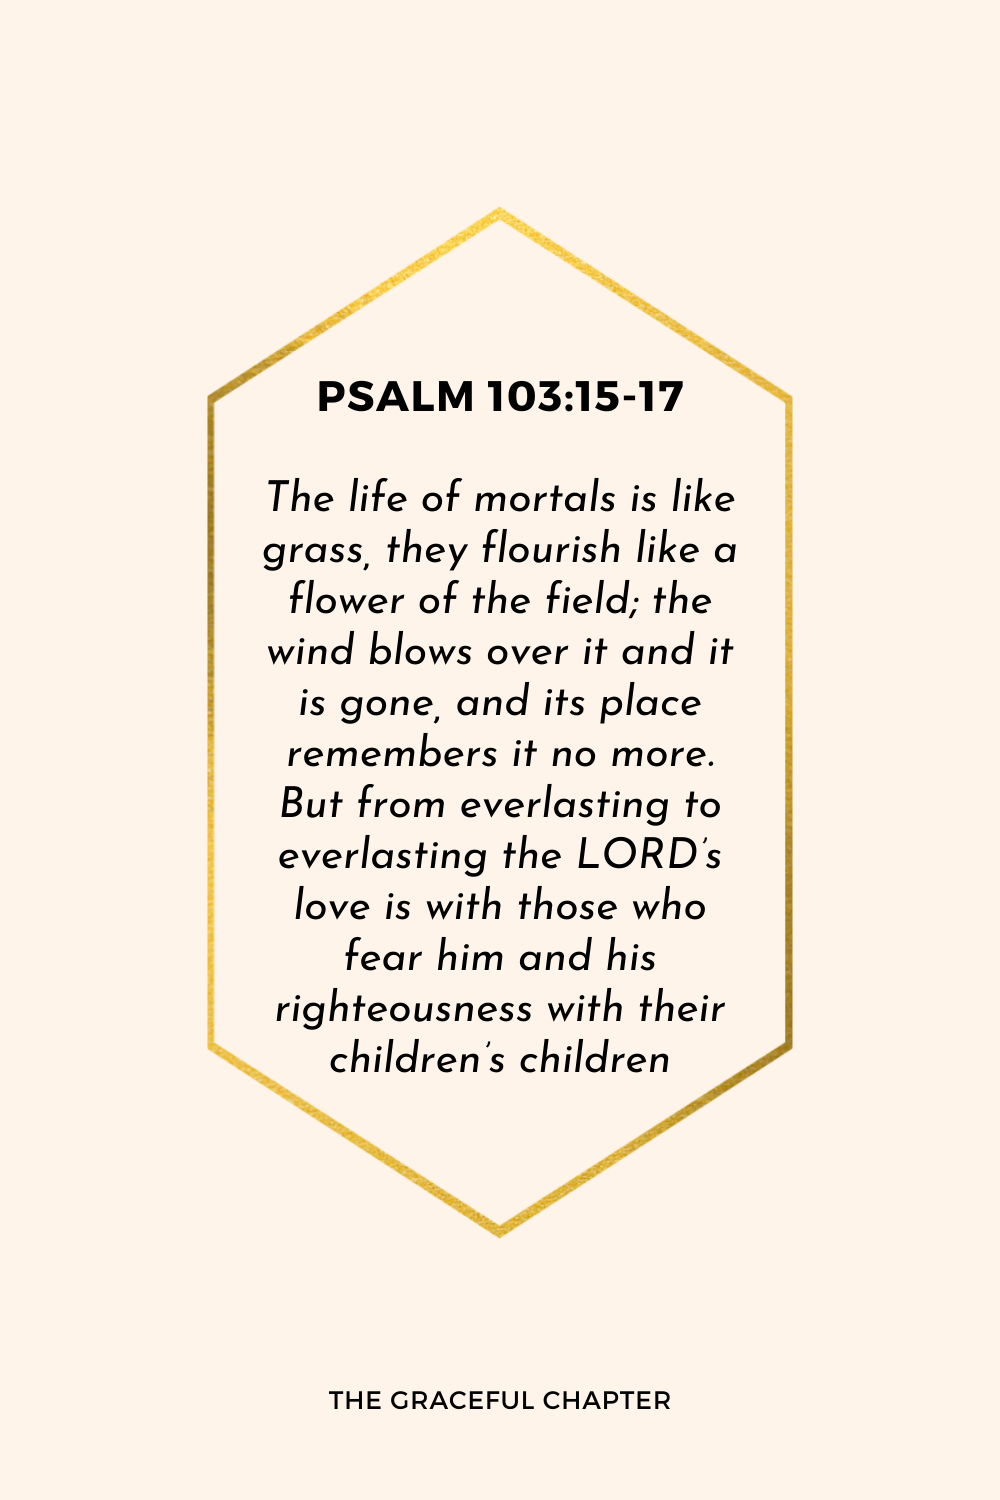 The life of mortals is like grass, they flourish like a flower of the field; the wind blows over it and it is gone, and its place remembers it no more. But from everlasting to everlasting the LORD’s love is with those who fear him and his righteousness with their children’s children. Psalm 103:15-17